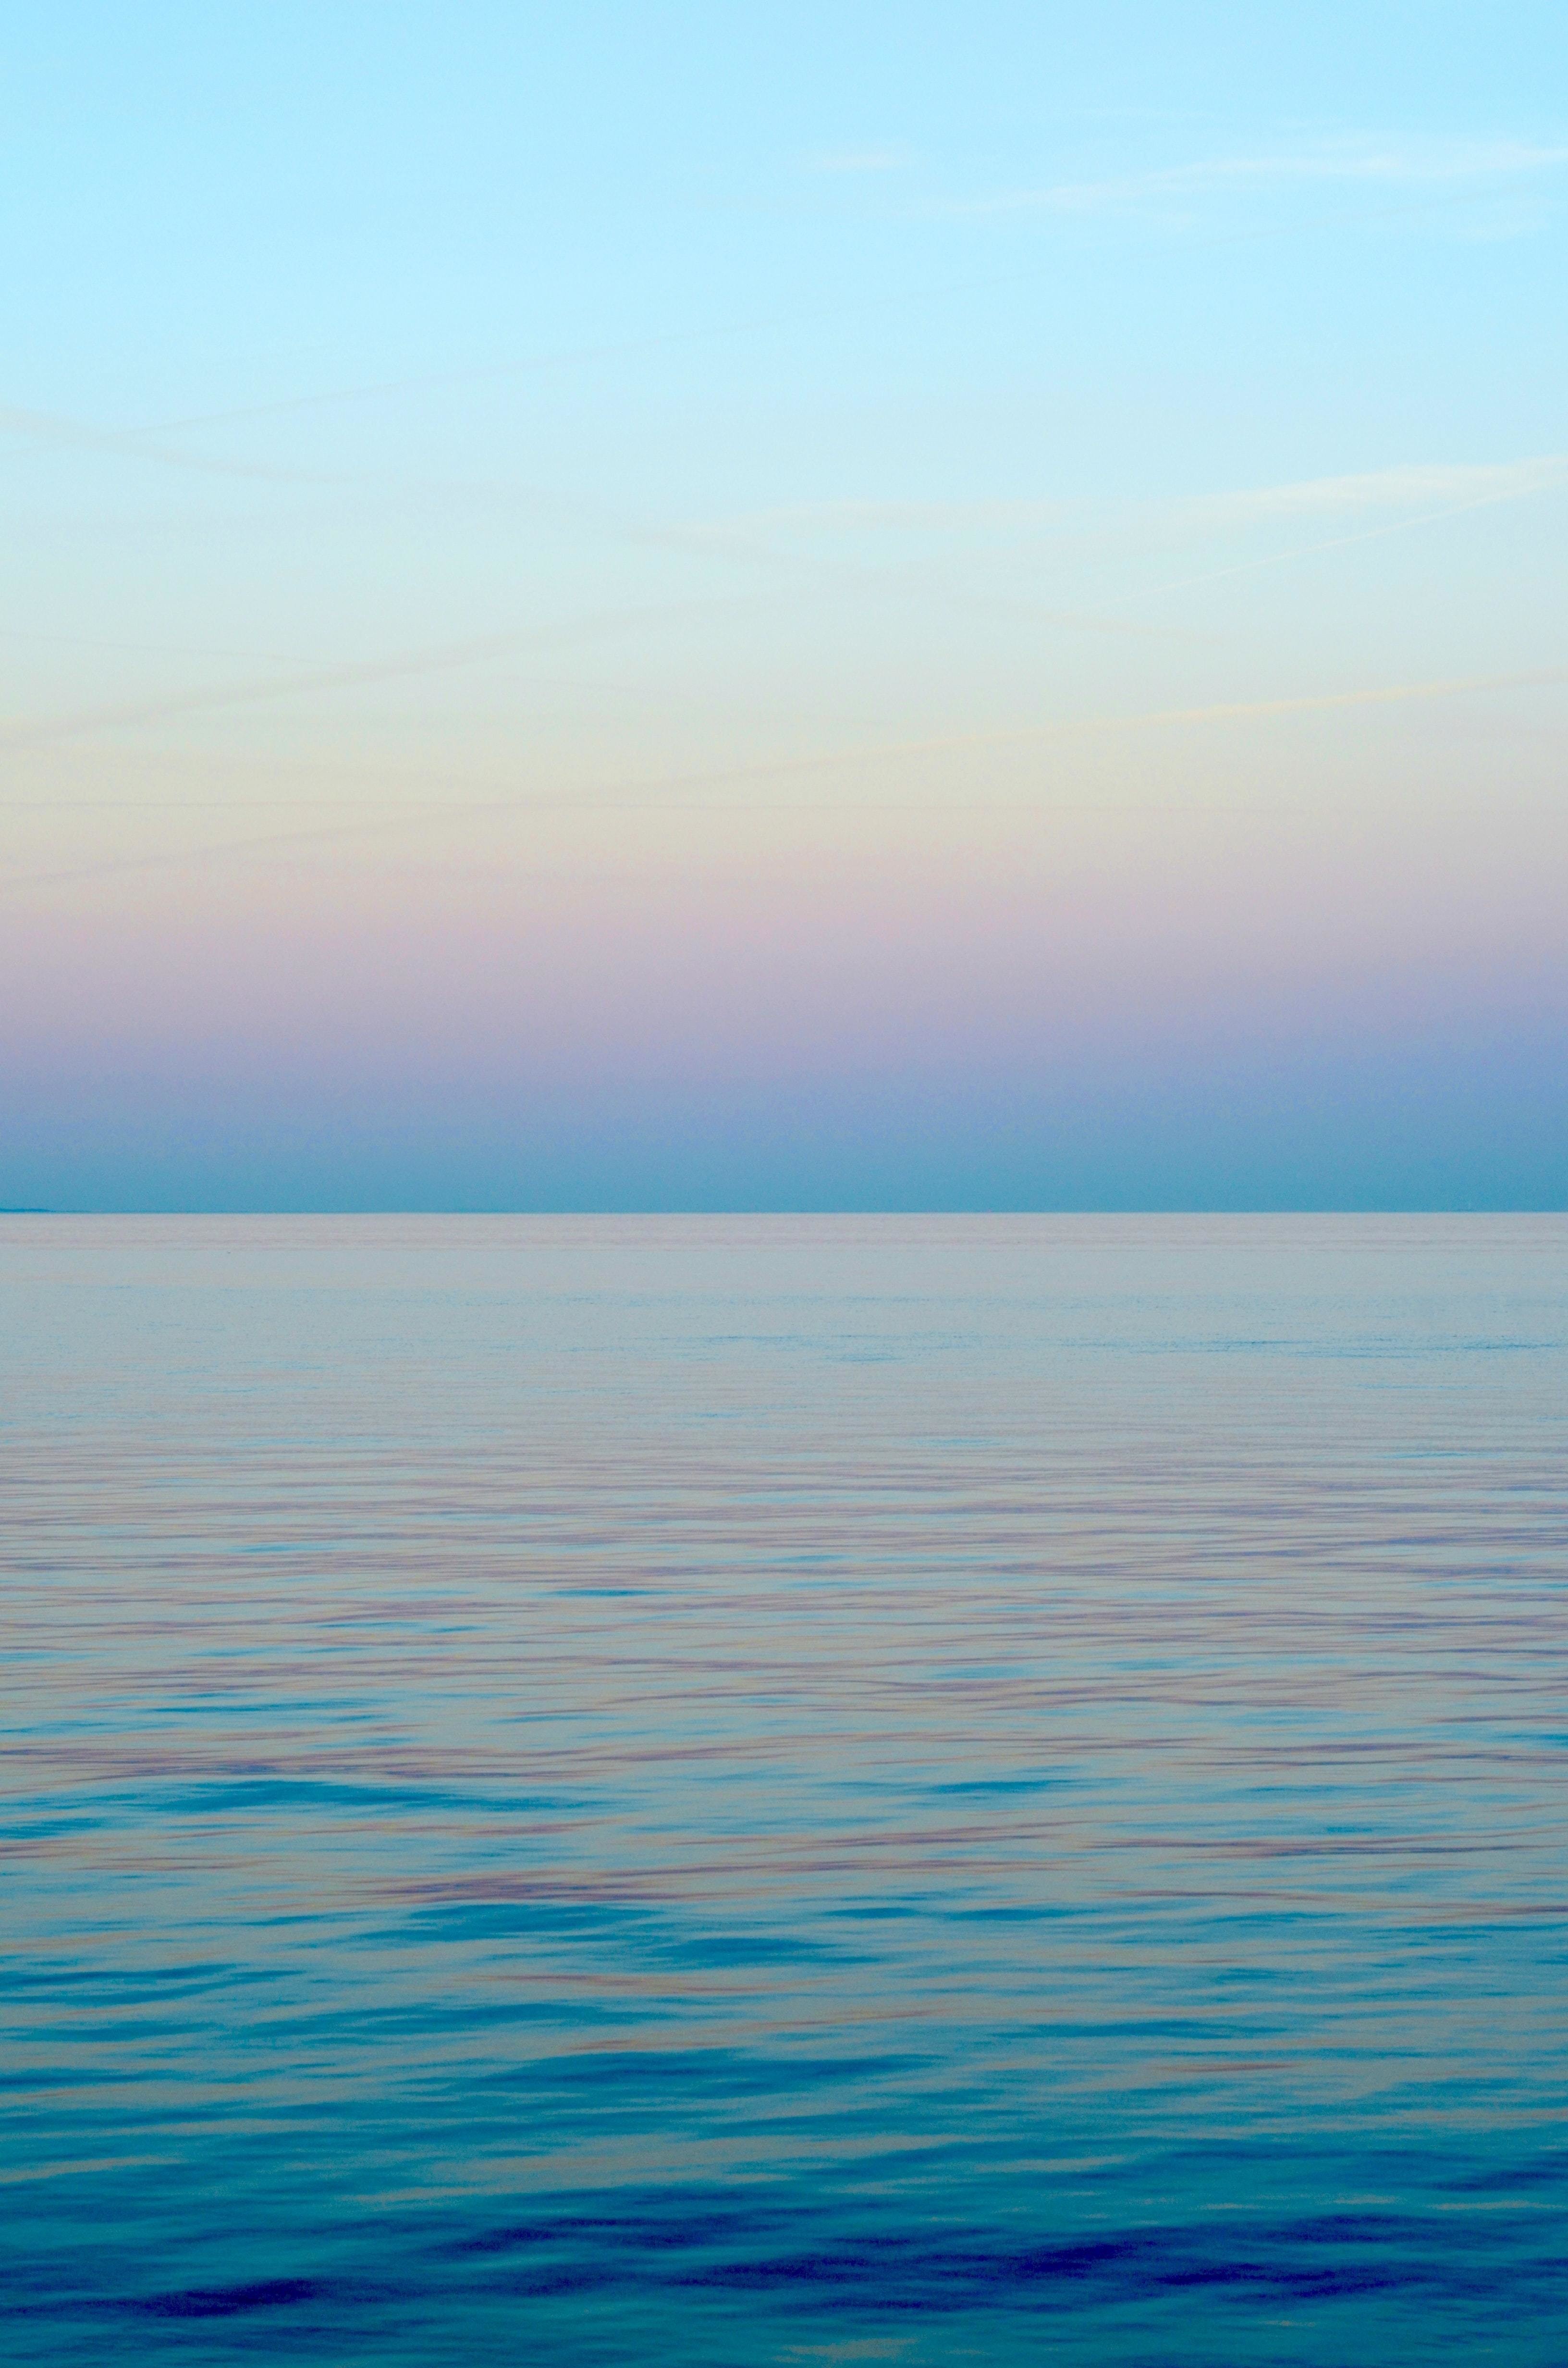 Ocean horizon with pastel colors in the sky